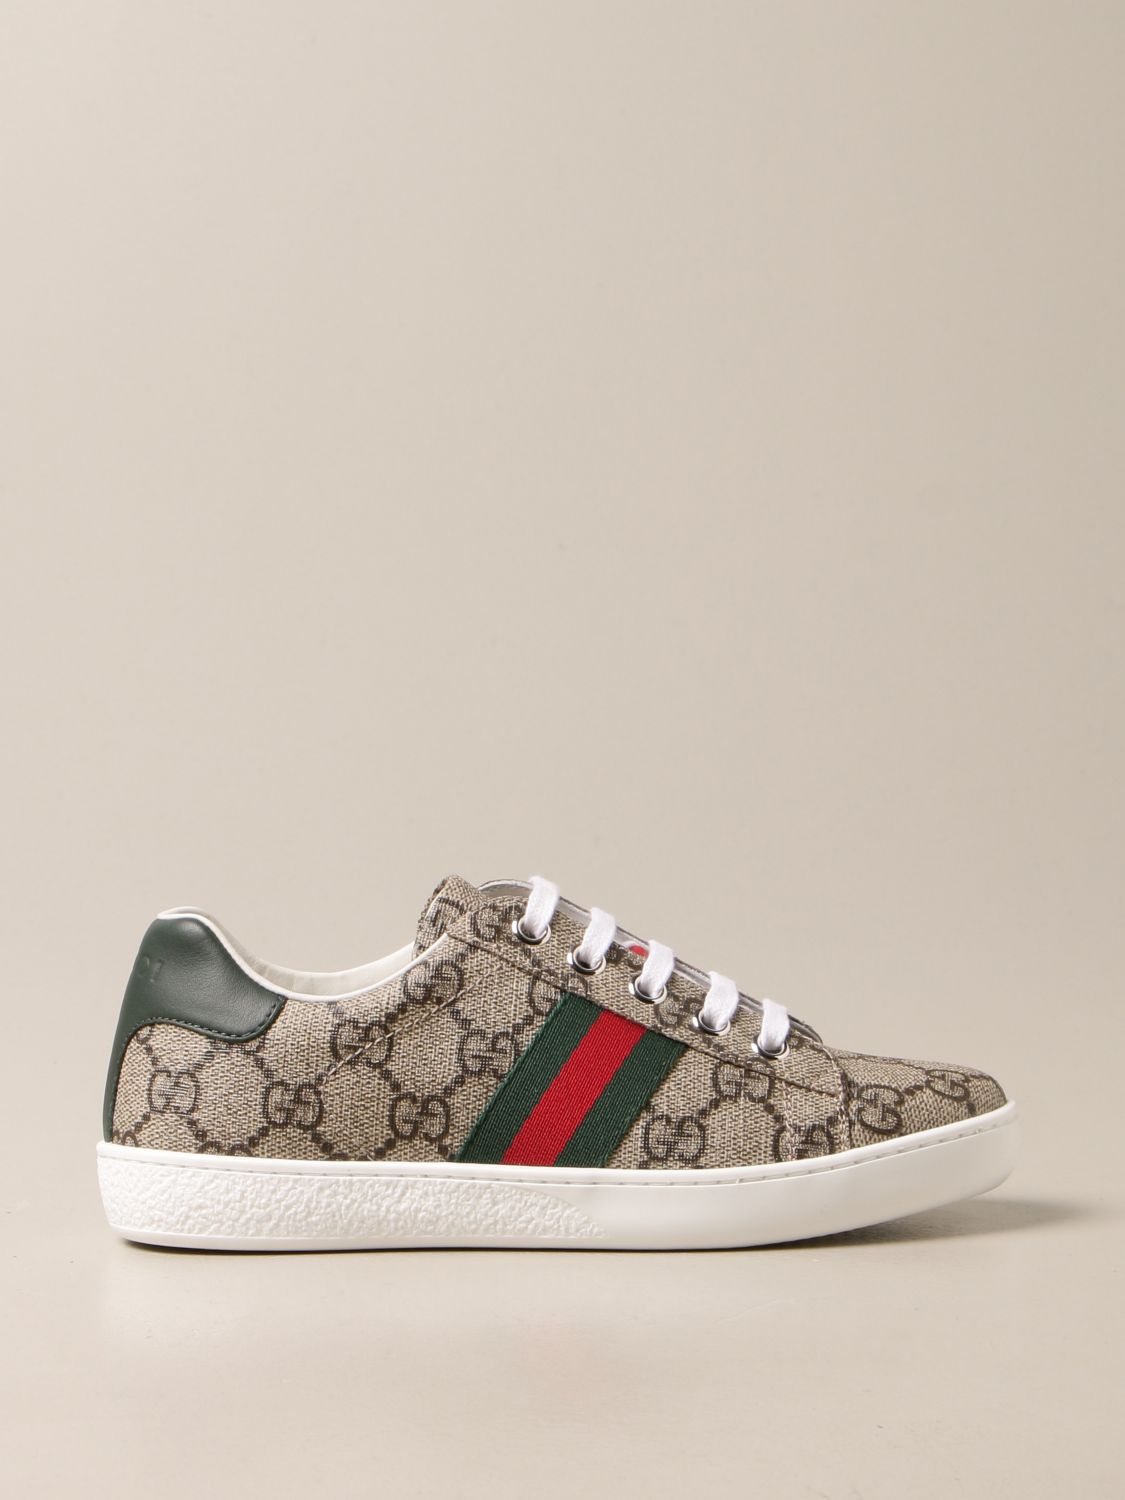 GUCCI: Ace sneakers in GG Supreme fabric with Web bands - Green | Gucci ...